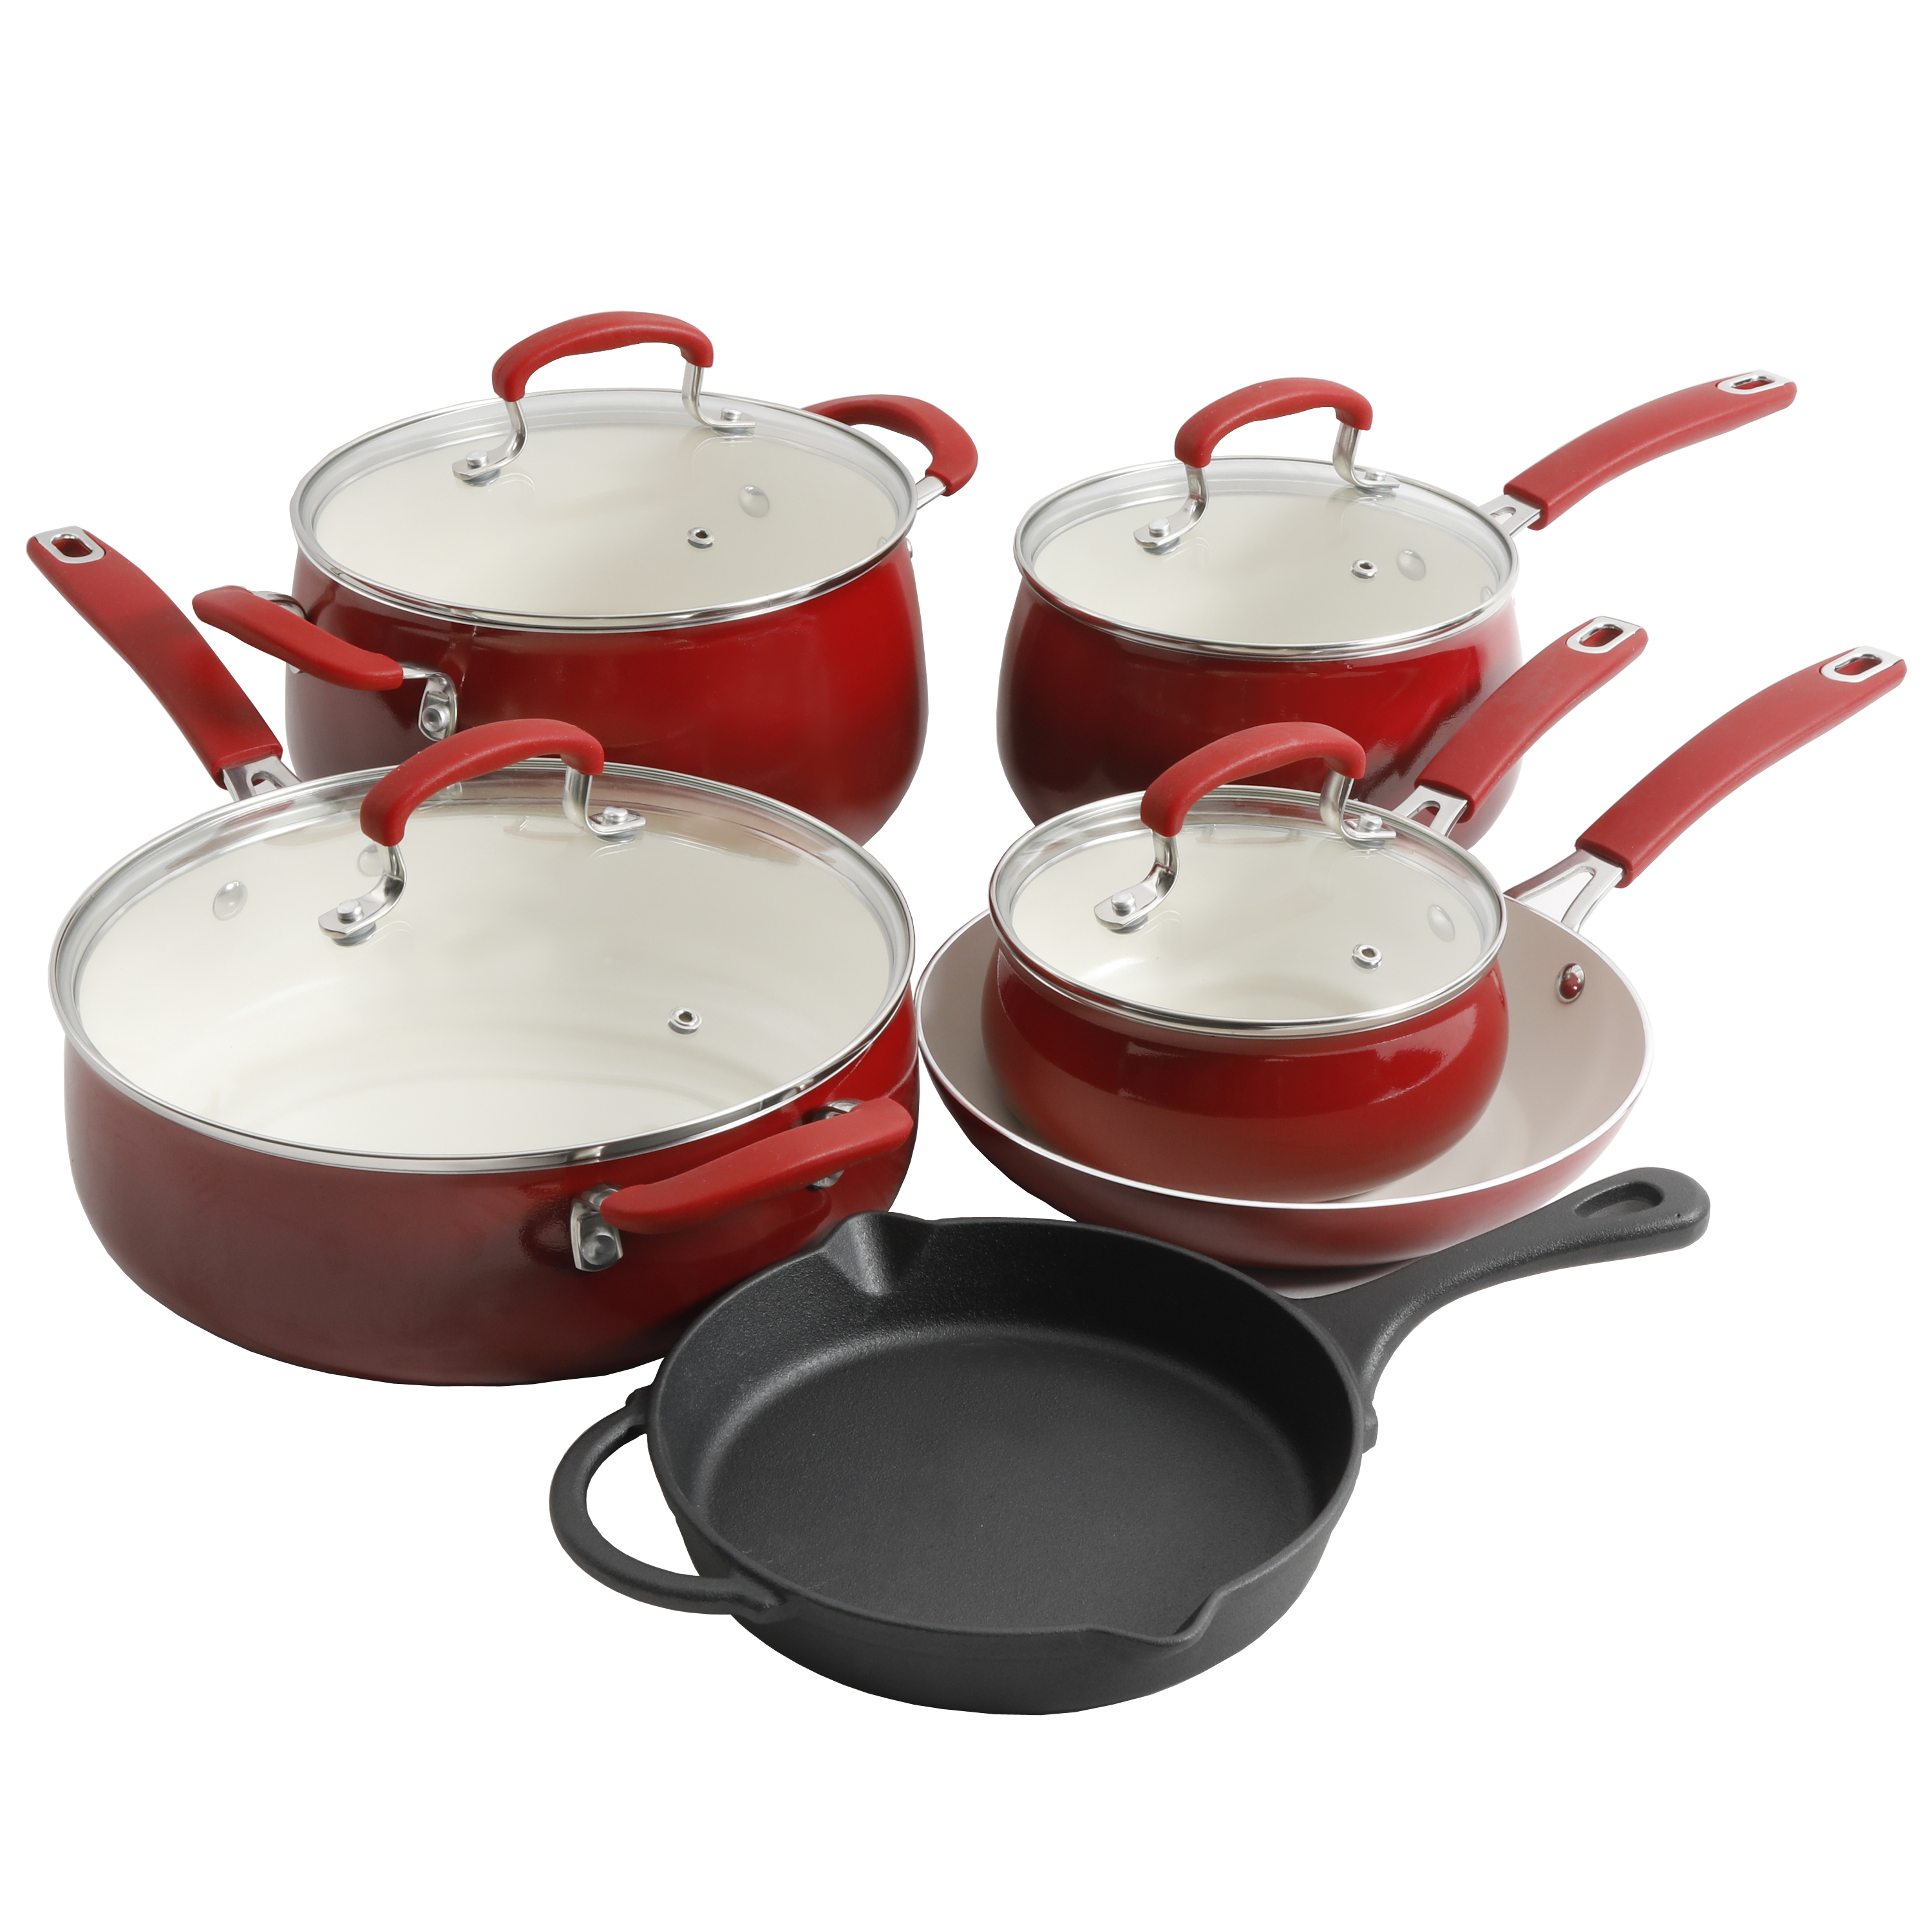 The Pioneer Woman Classic Belly 10 Piece Ceramic Non-stick and Cast Iron Cookware Set, Red - image 3 of 9